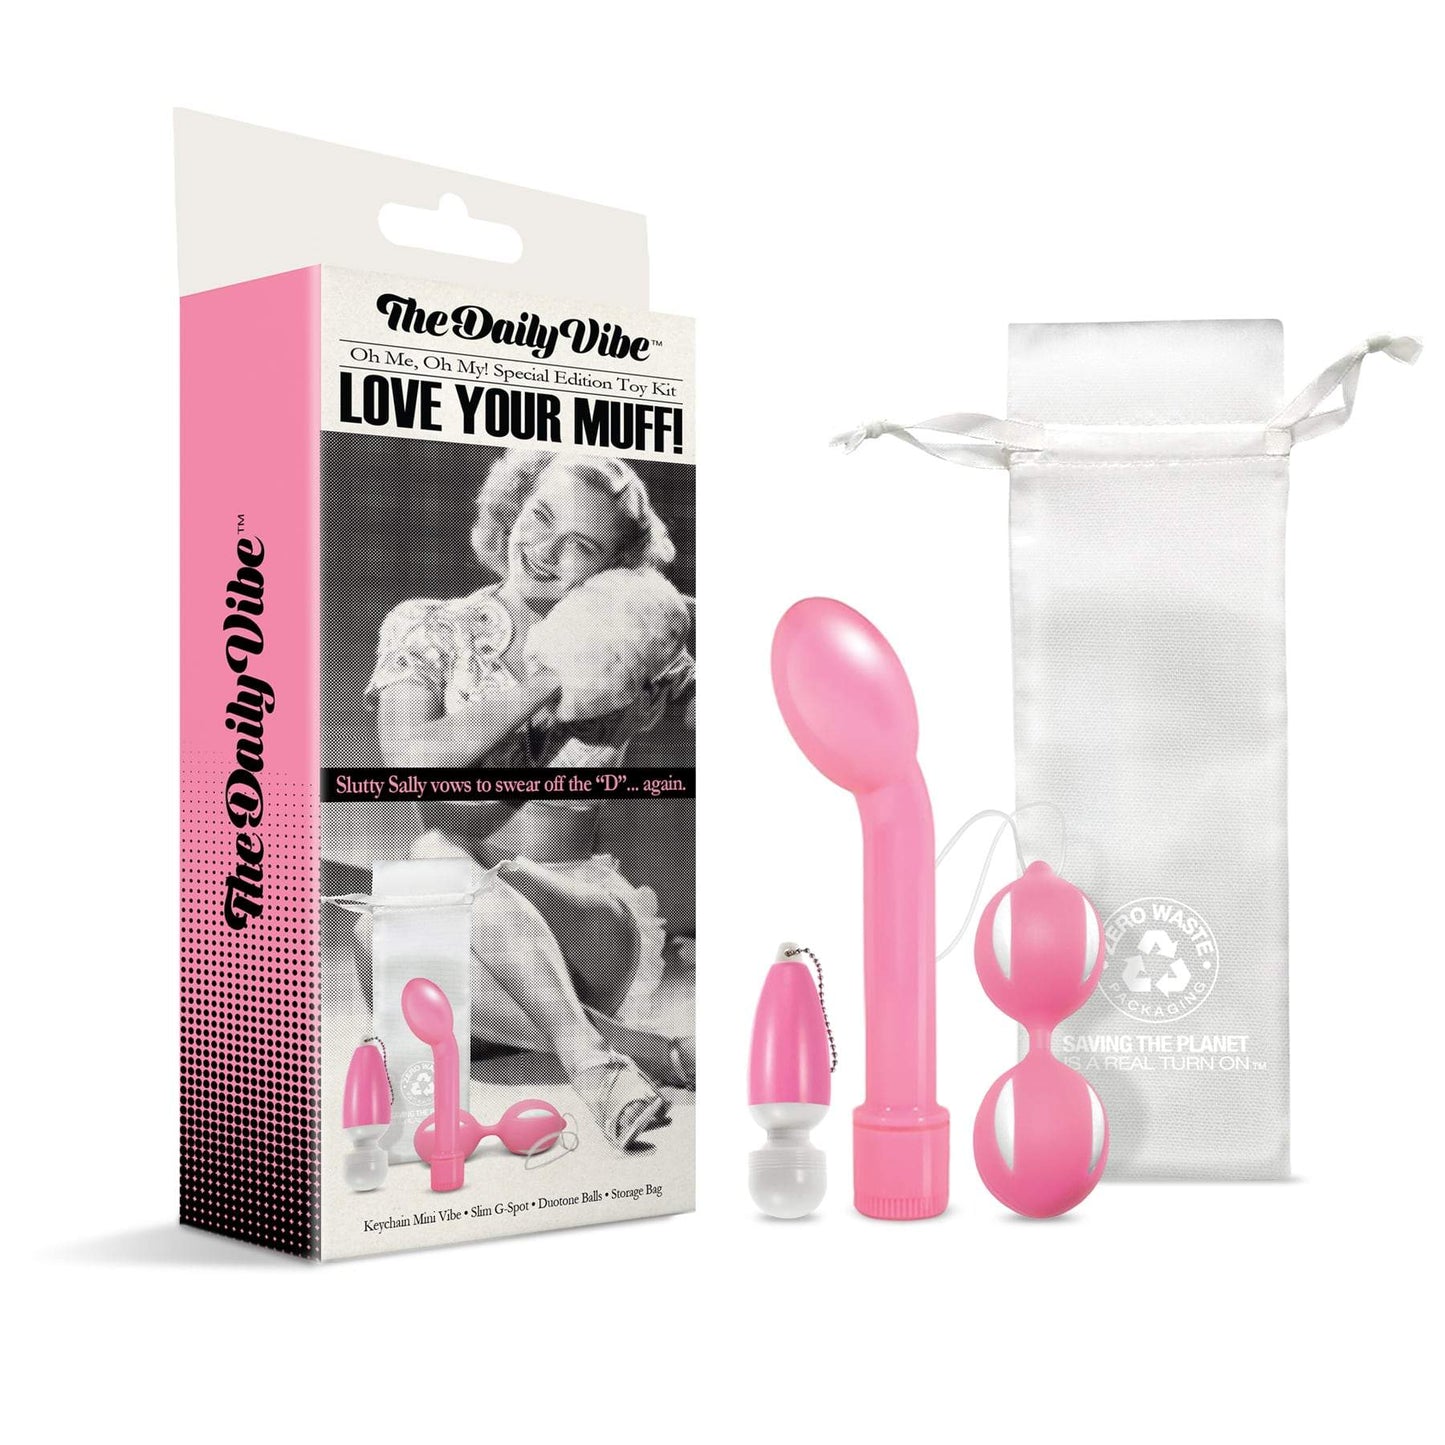 The Daily Vibe Special Edition Toy Kit, Love Your Muff w/storage bag - The Happy Ending Shop